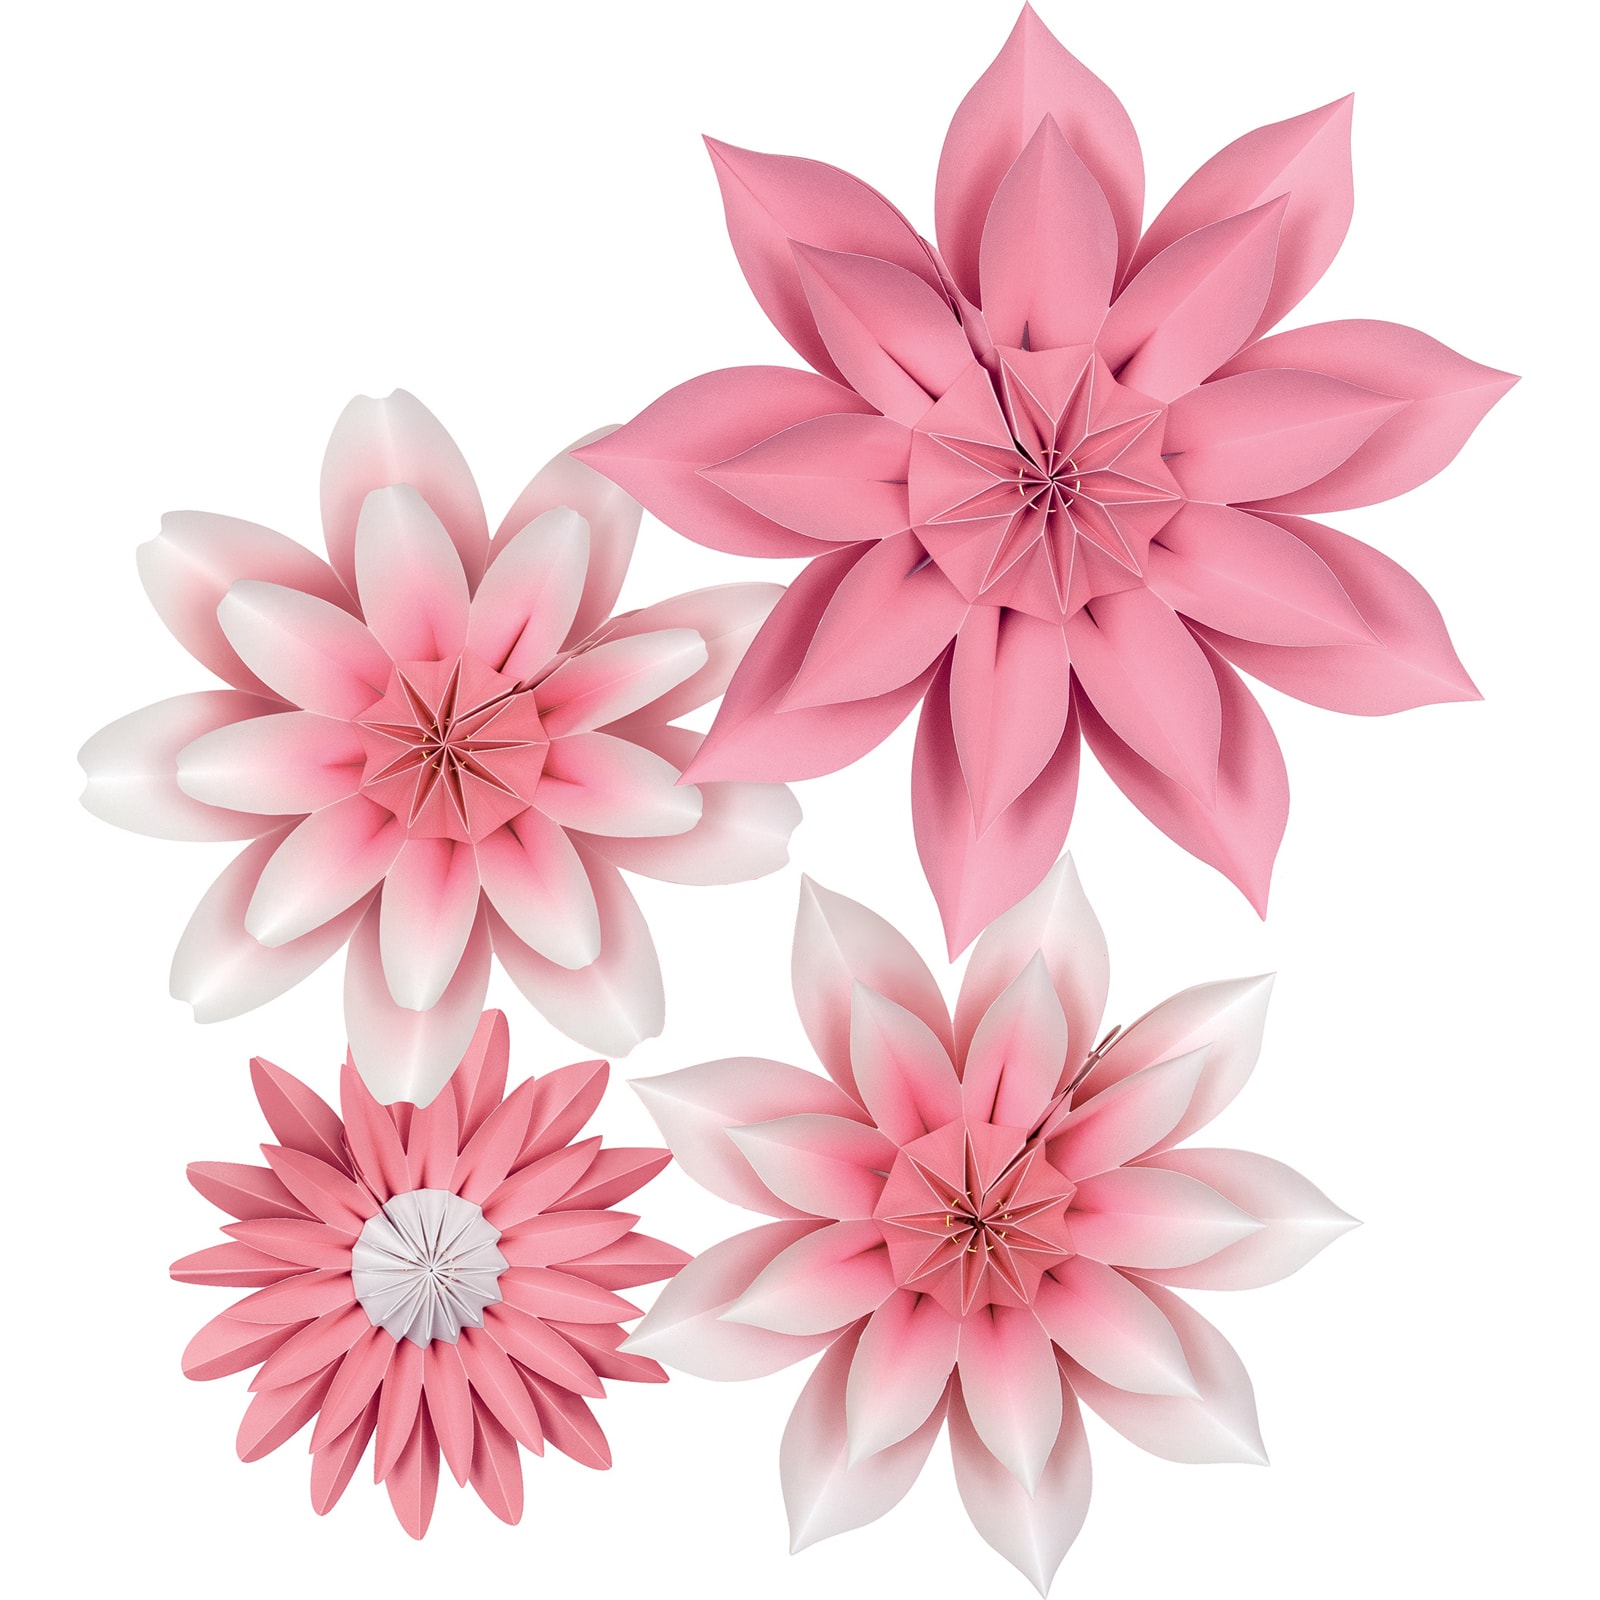 Teacher Created Resources Pink Blossoms Paper Flowers, 4ct.